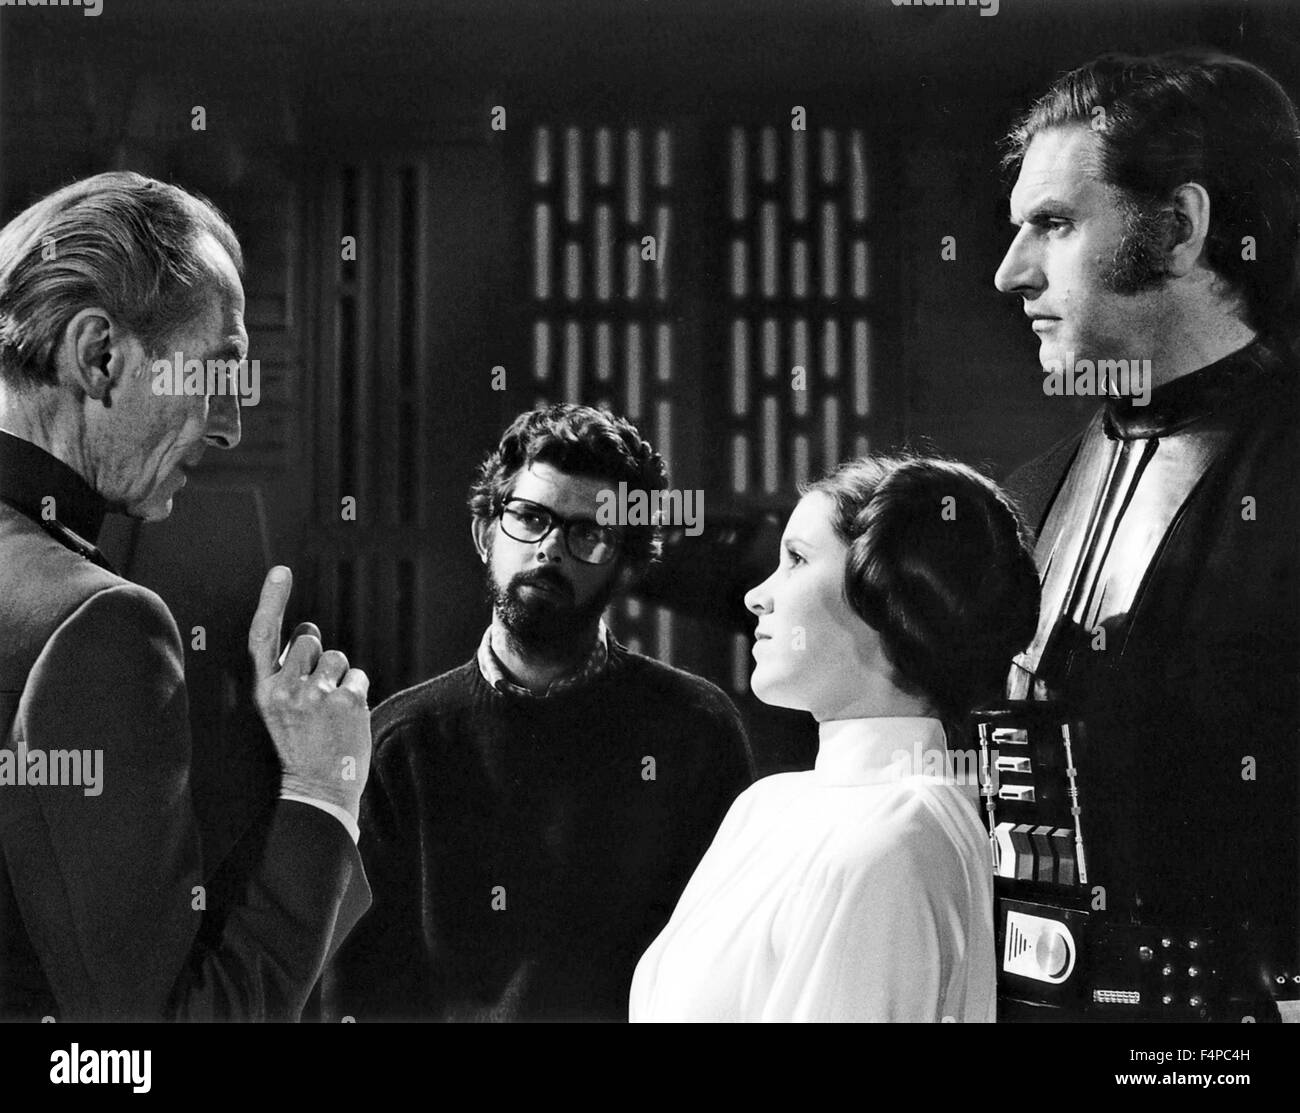 George lucas, Peter Cushing, Carrie Fisher, David Prowse / Star Wars - A New Hope 1977 directed by George Lucas Stock Photo